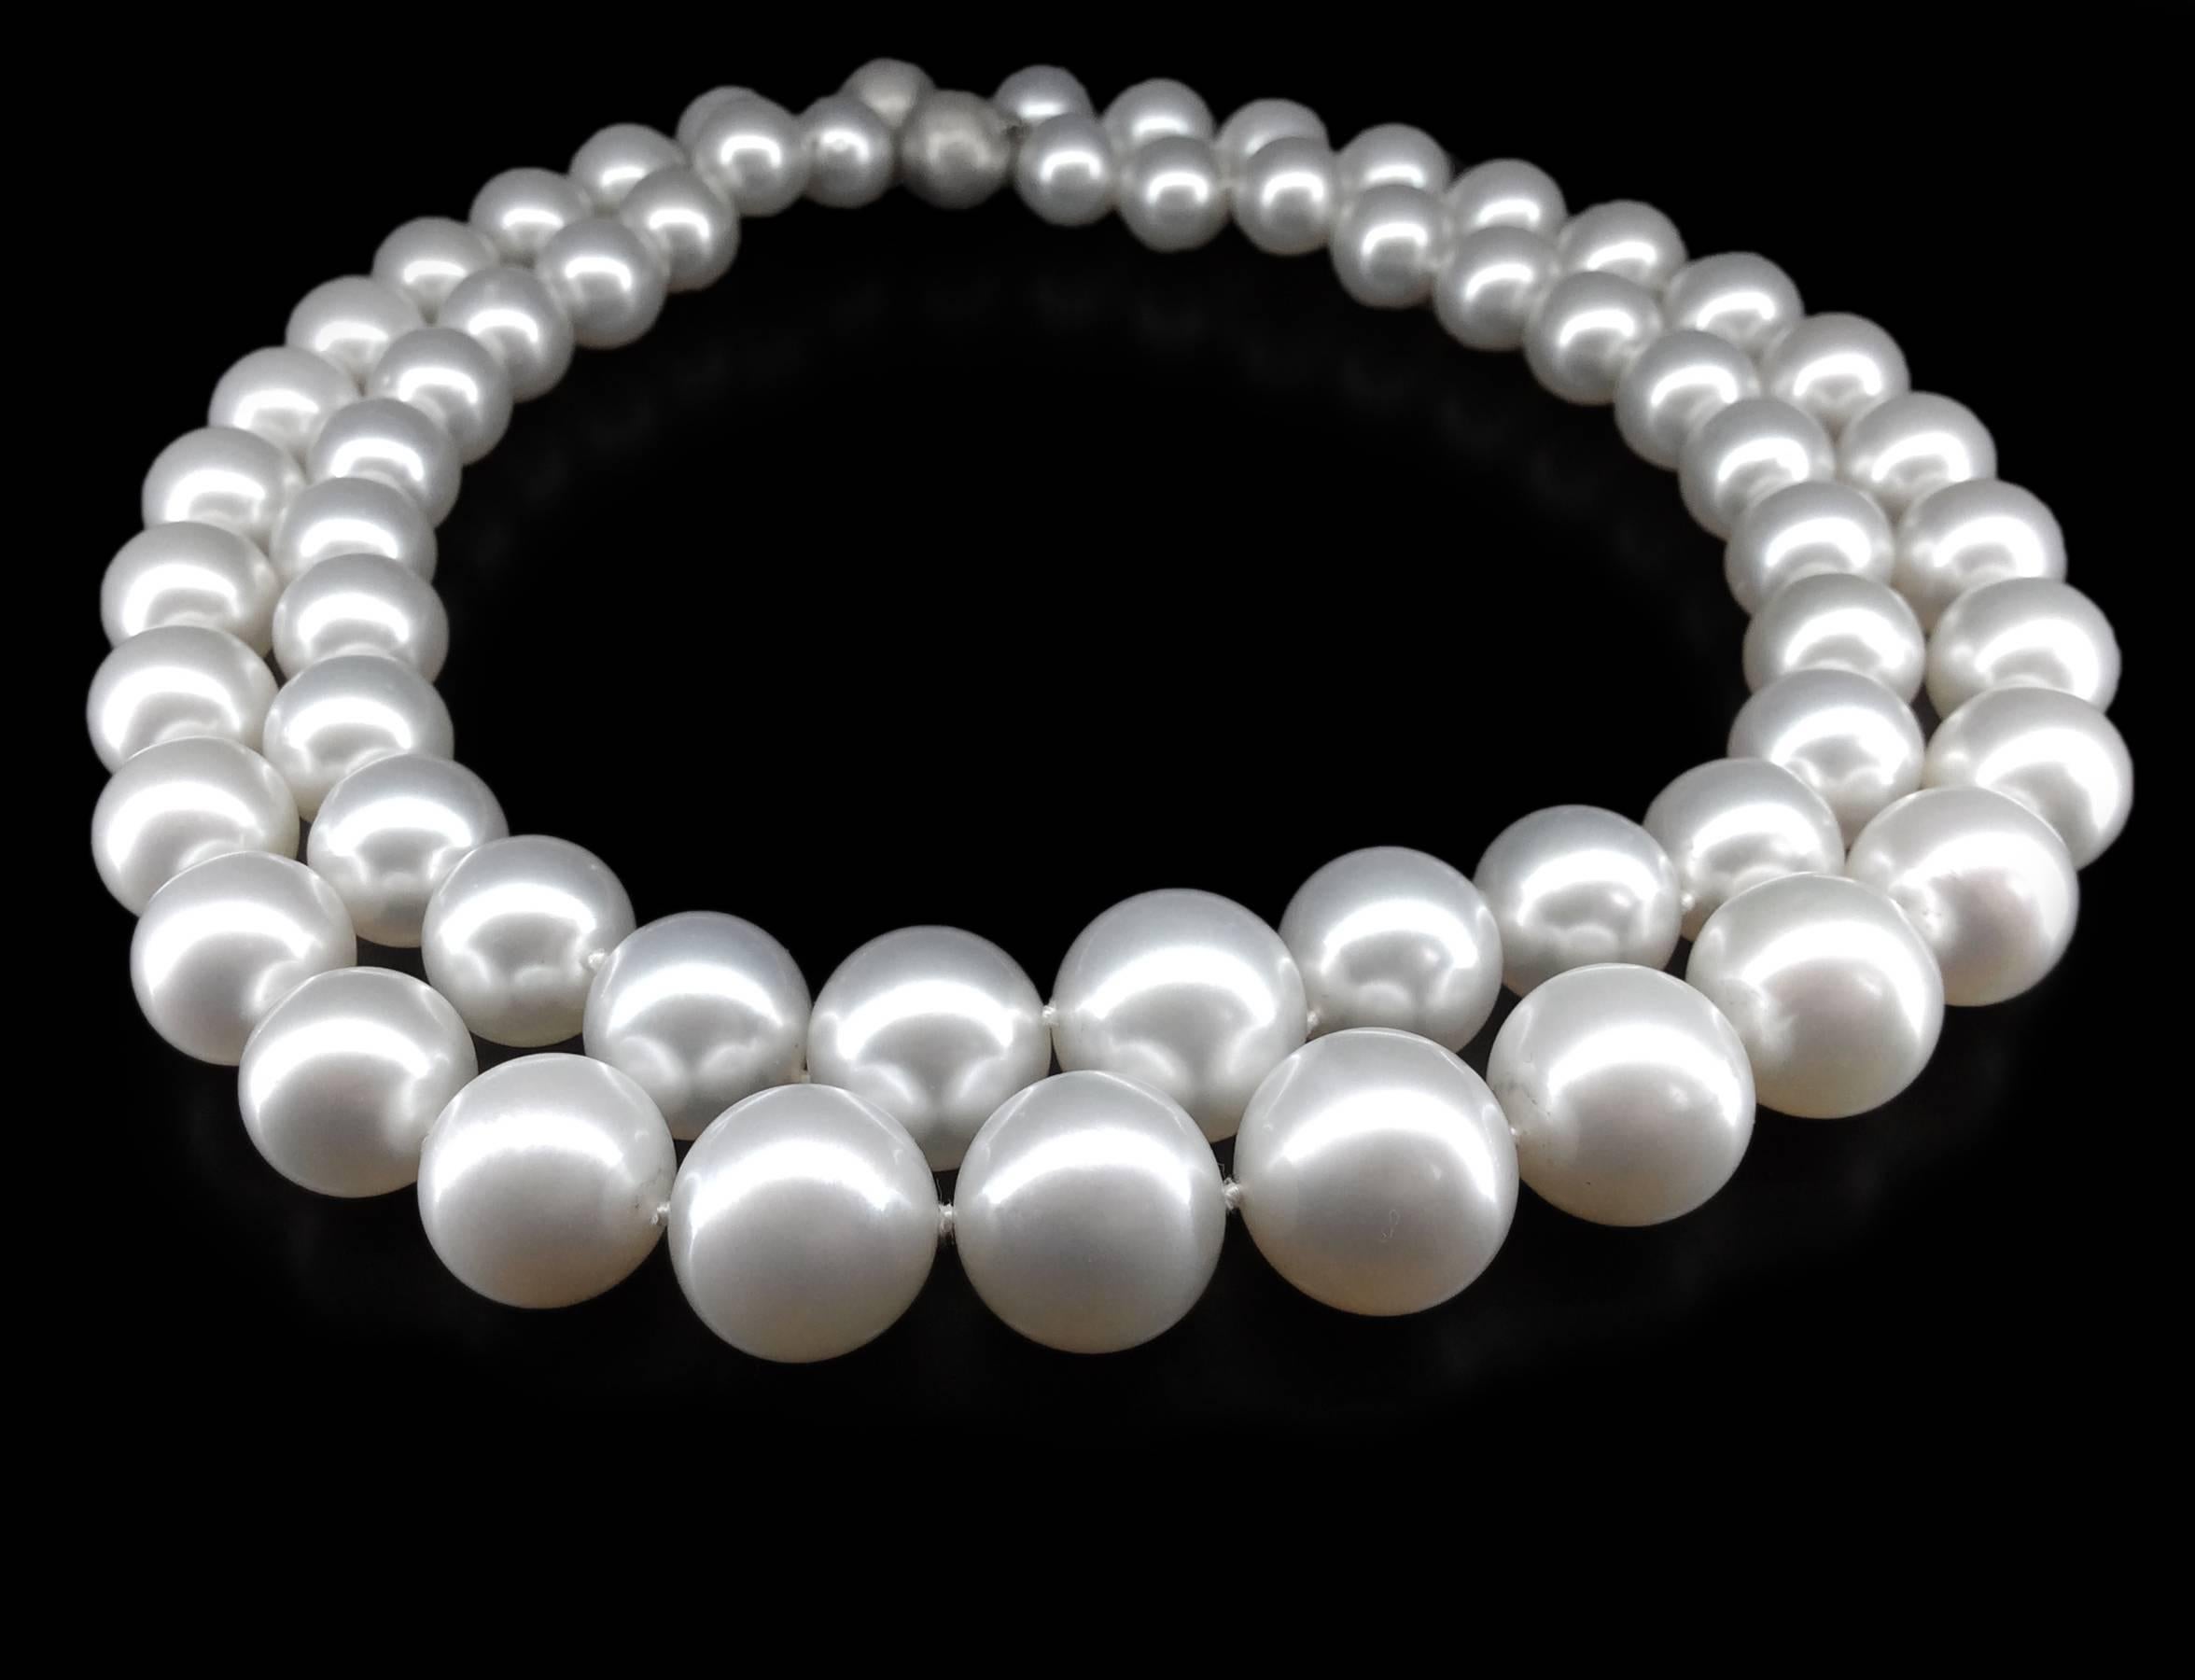 Iridescent white South Sea pearls positively glow on these beautiful necklaces. Decadently beautiful and desirable on any skin tone.

29 graduated 10.5 – 14.7 millimeter, 15